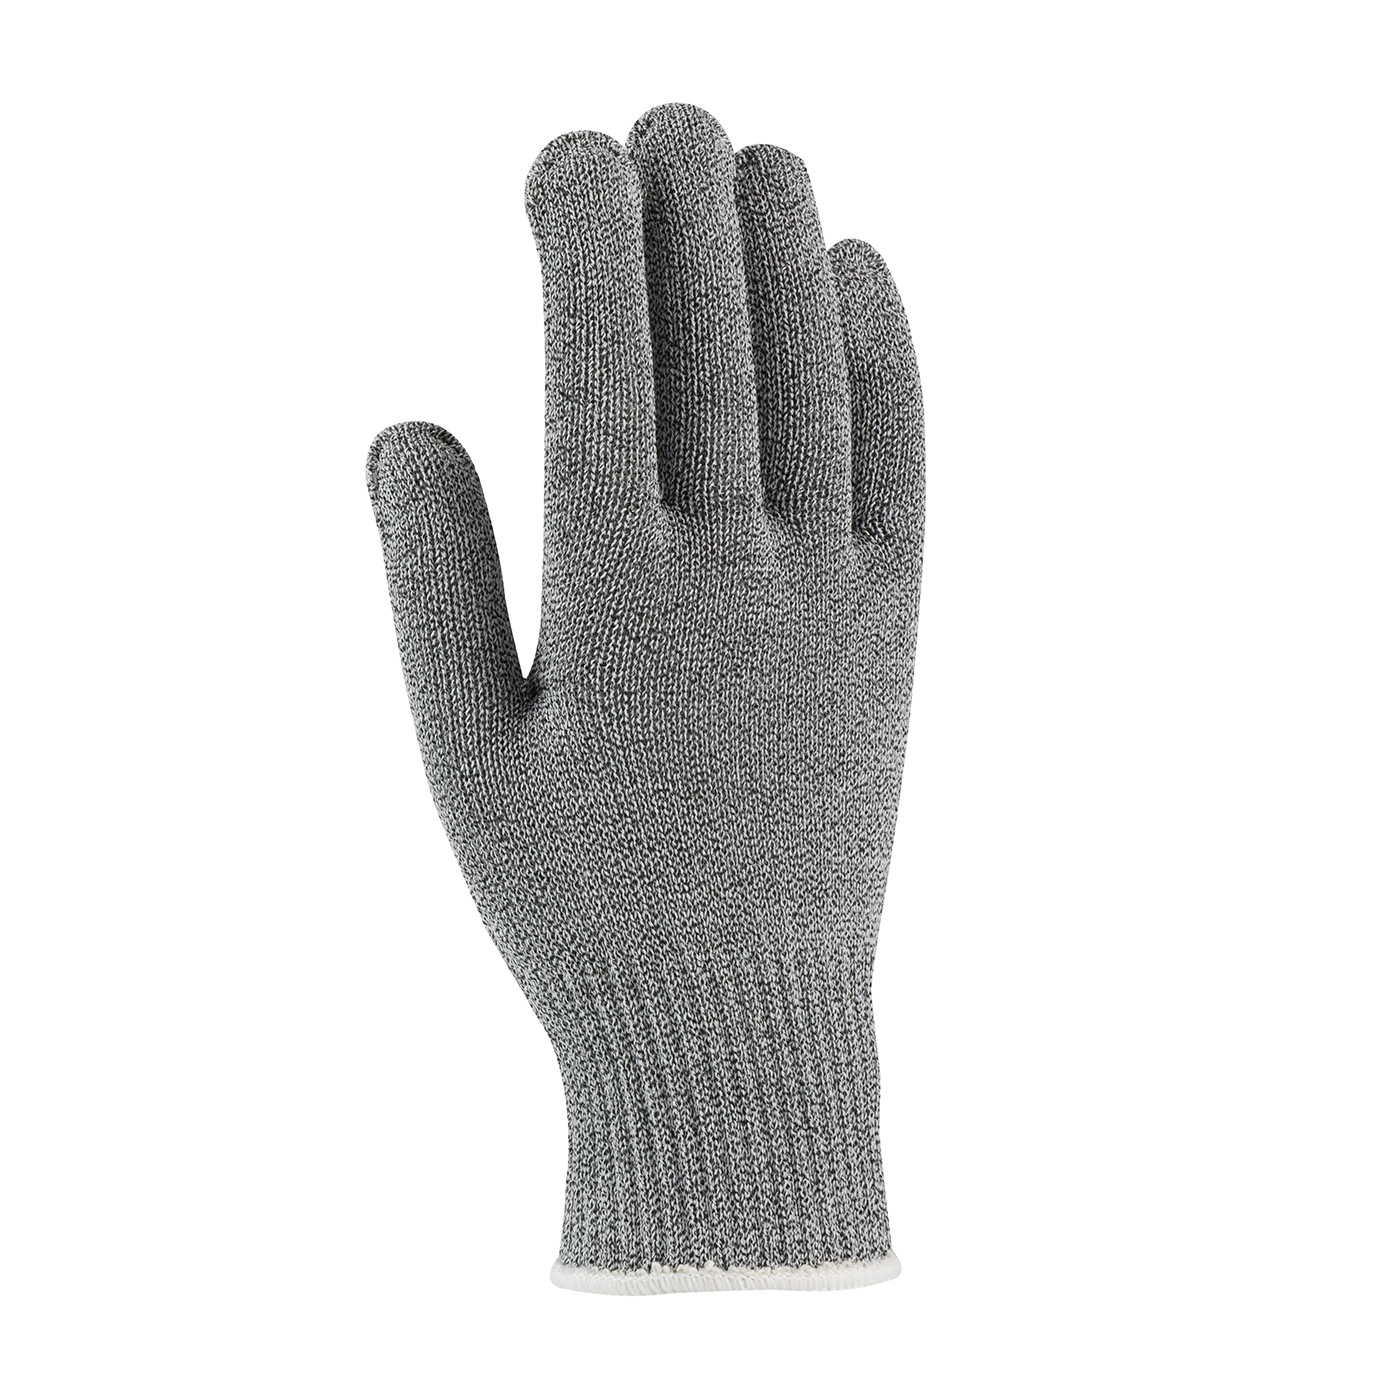 22-750G PIP® gray Claw Cover® Seamless Knit Dyneema® Blended Antimicrobial Glove - Light Weight